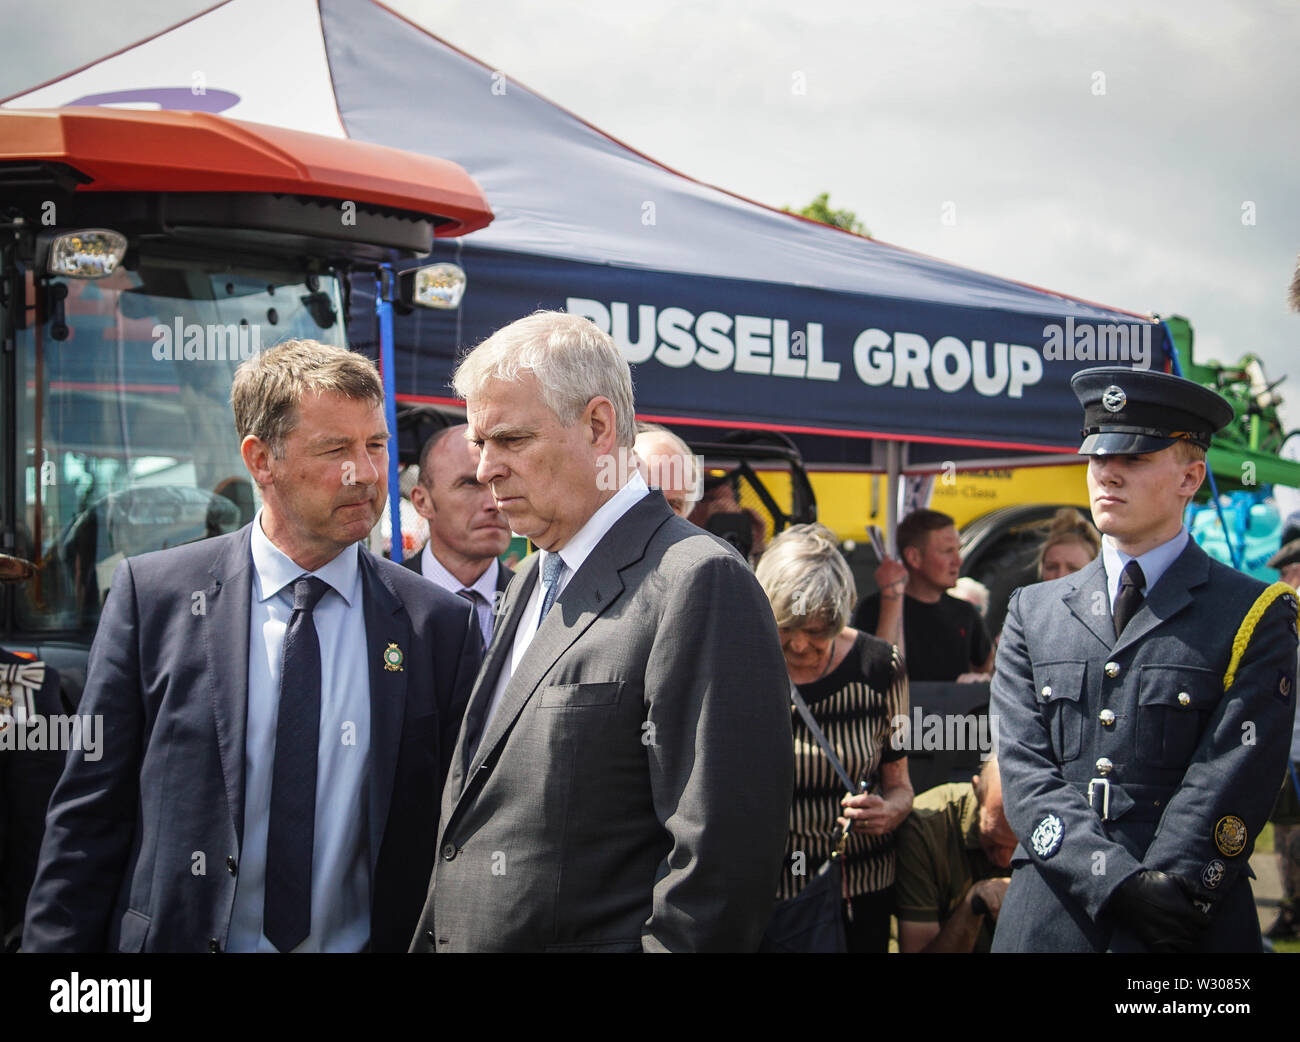 Prince Andrew, Duke of York visits the showground on the final day of the 161st Great Yorkshire Show.Great Yorkshire Show is held annually on 9 - 11 July and celebrates the farming and agricultural community. Stock Photo